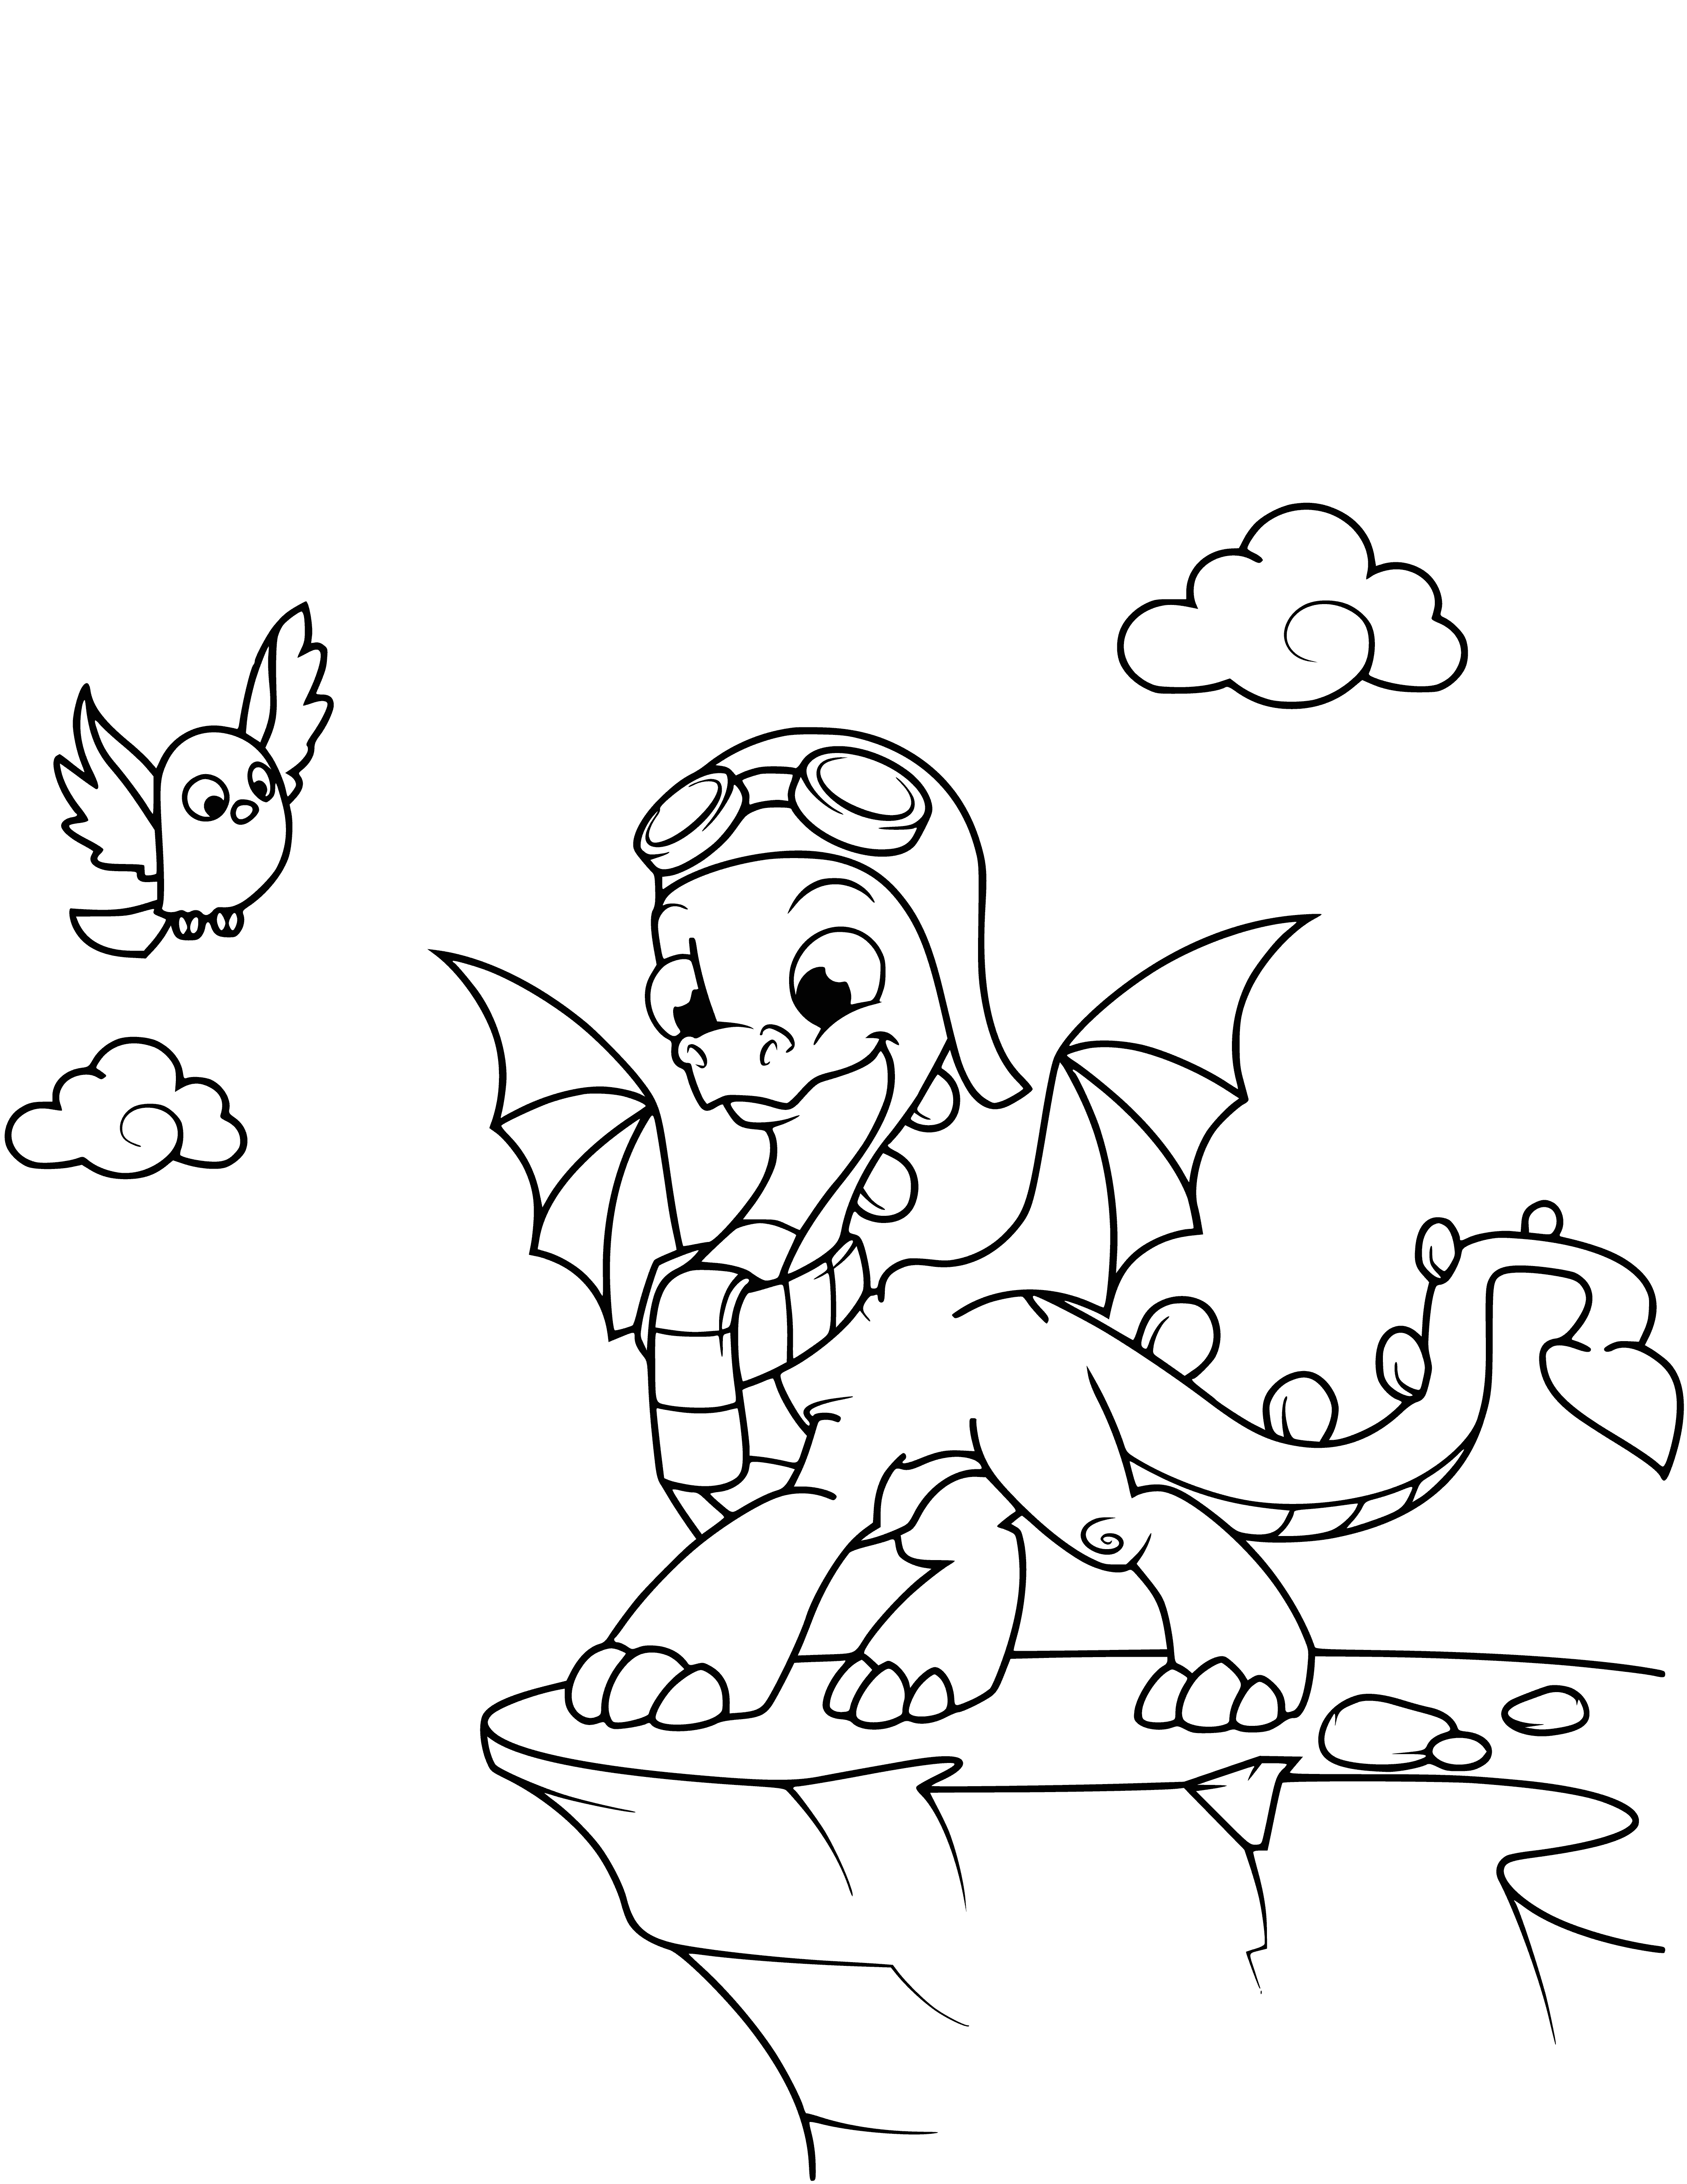 The little dragon learns to fly coloring page